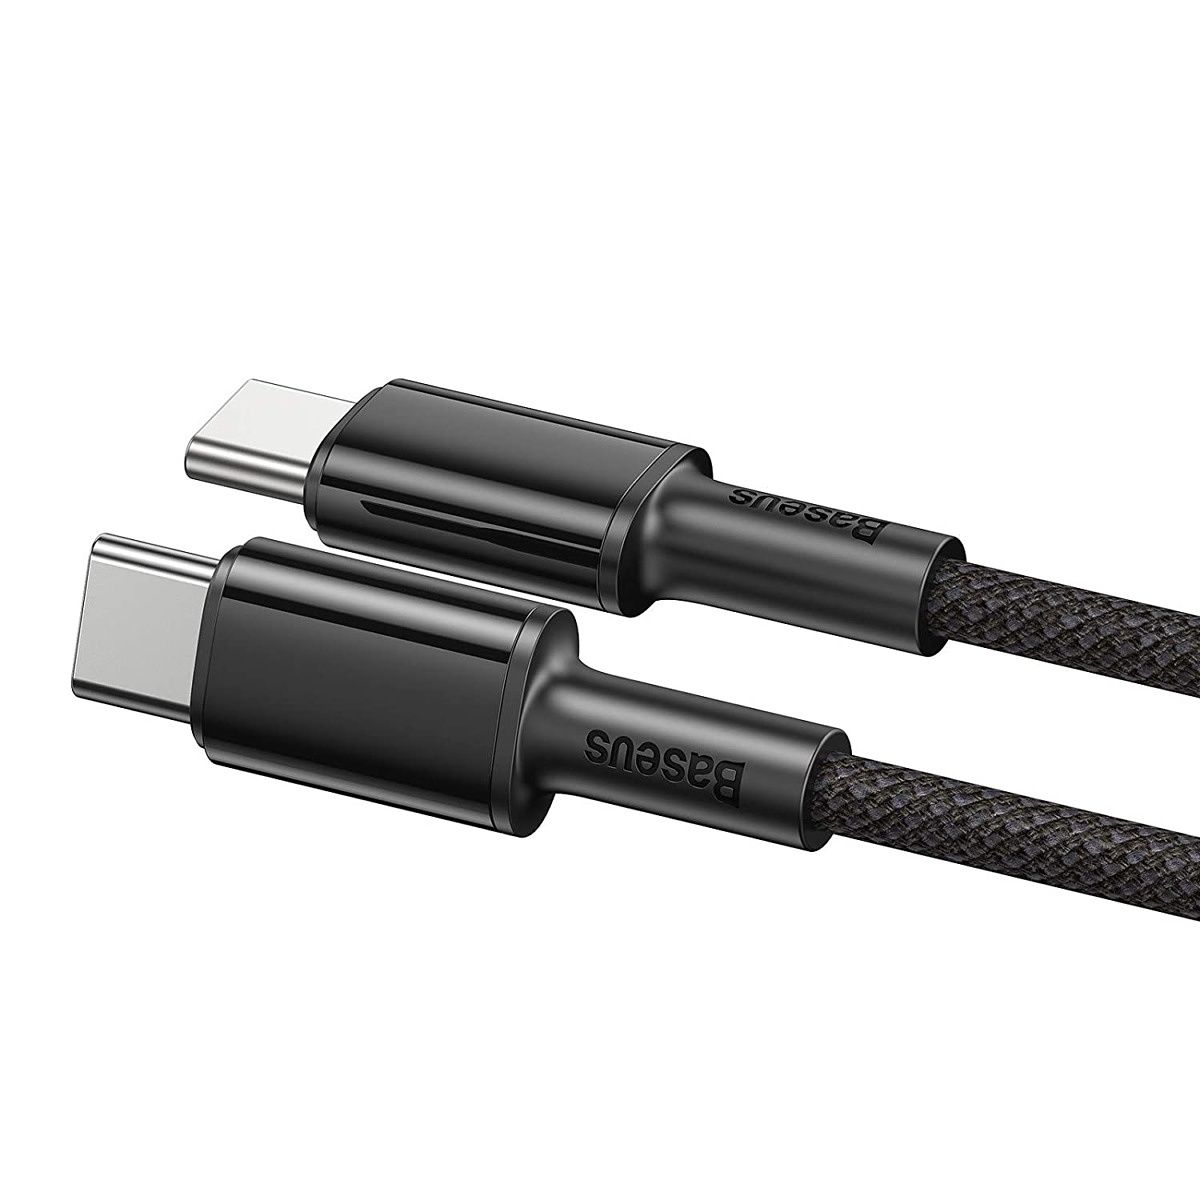 This affordable USB Type-C to Type-C cable from Baseus supports up to 100W power delivery and is capable of USB 2.0 data transfer speeds. In addition, the cable is nylon braided for enhanced durability.